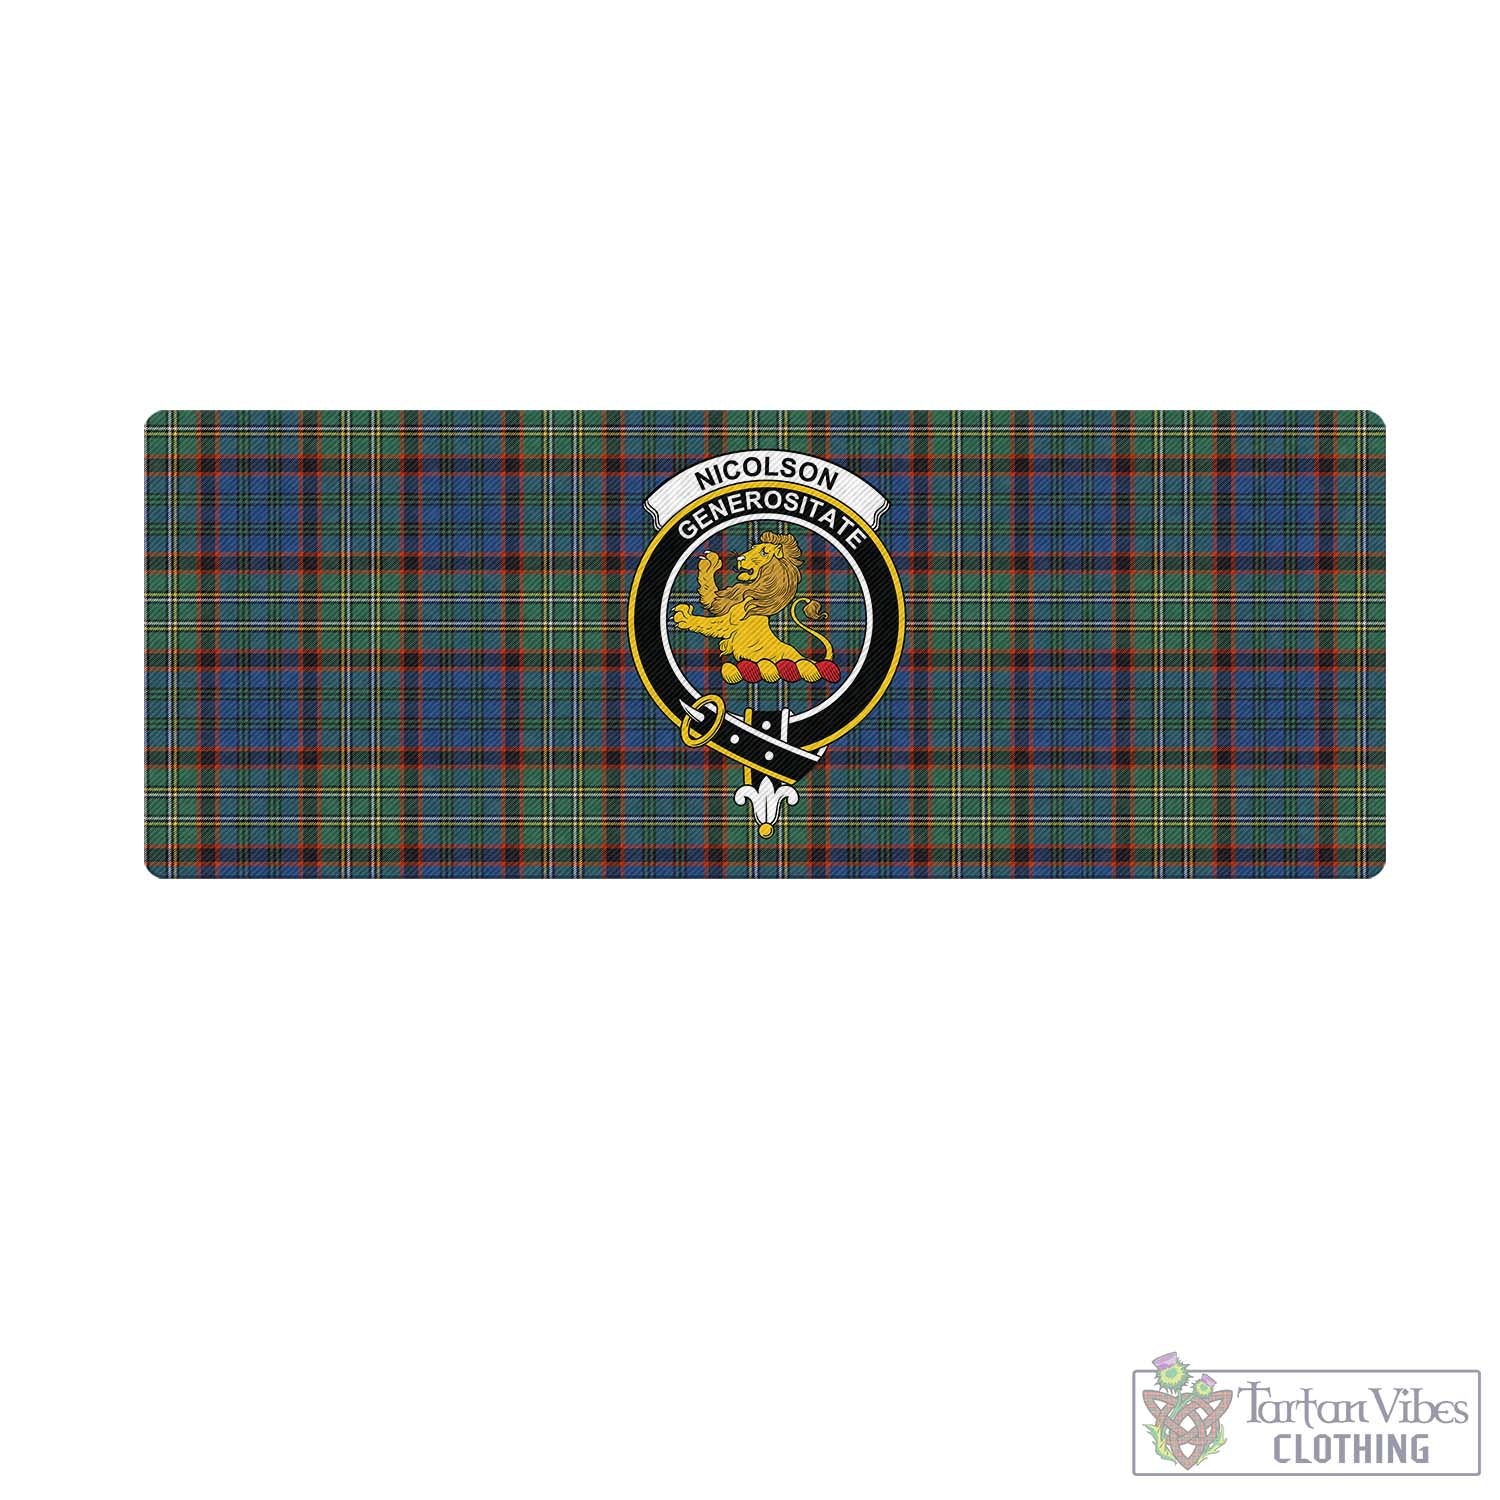 Tartan Vibes Clothing Nicolson Hunting Ancient Tartan Mouse Pad with Family Crest